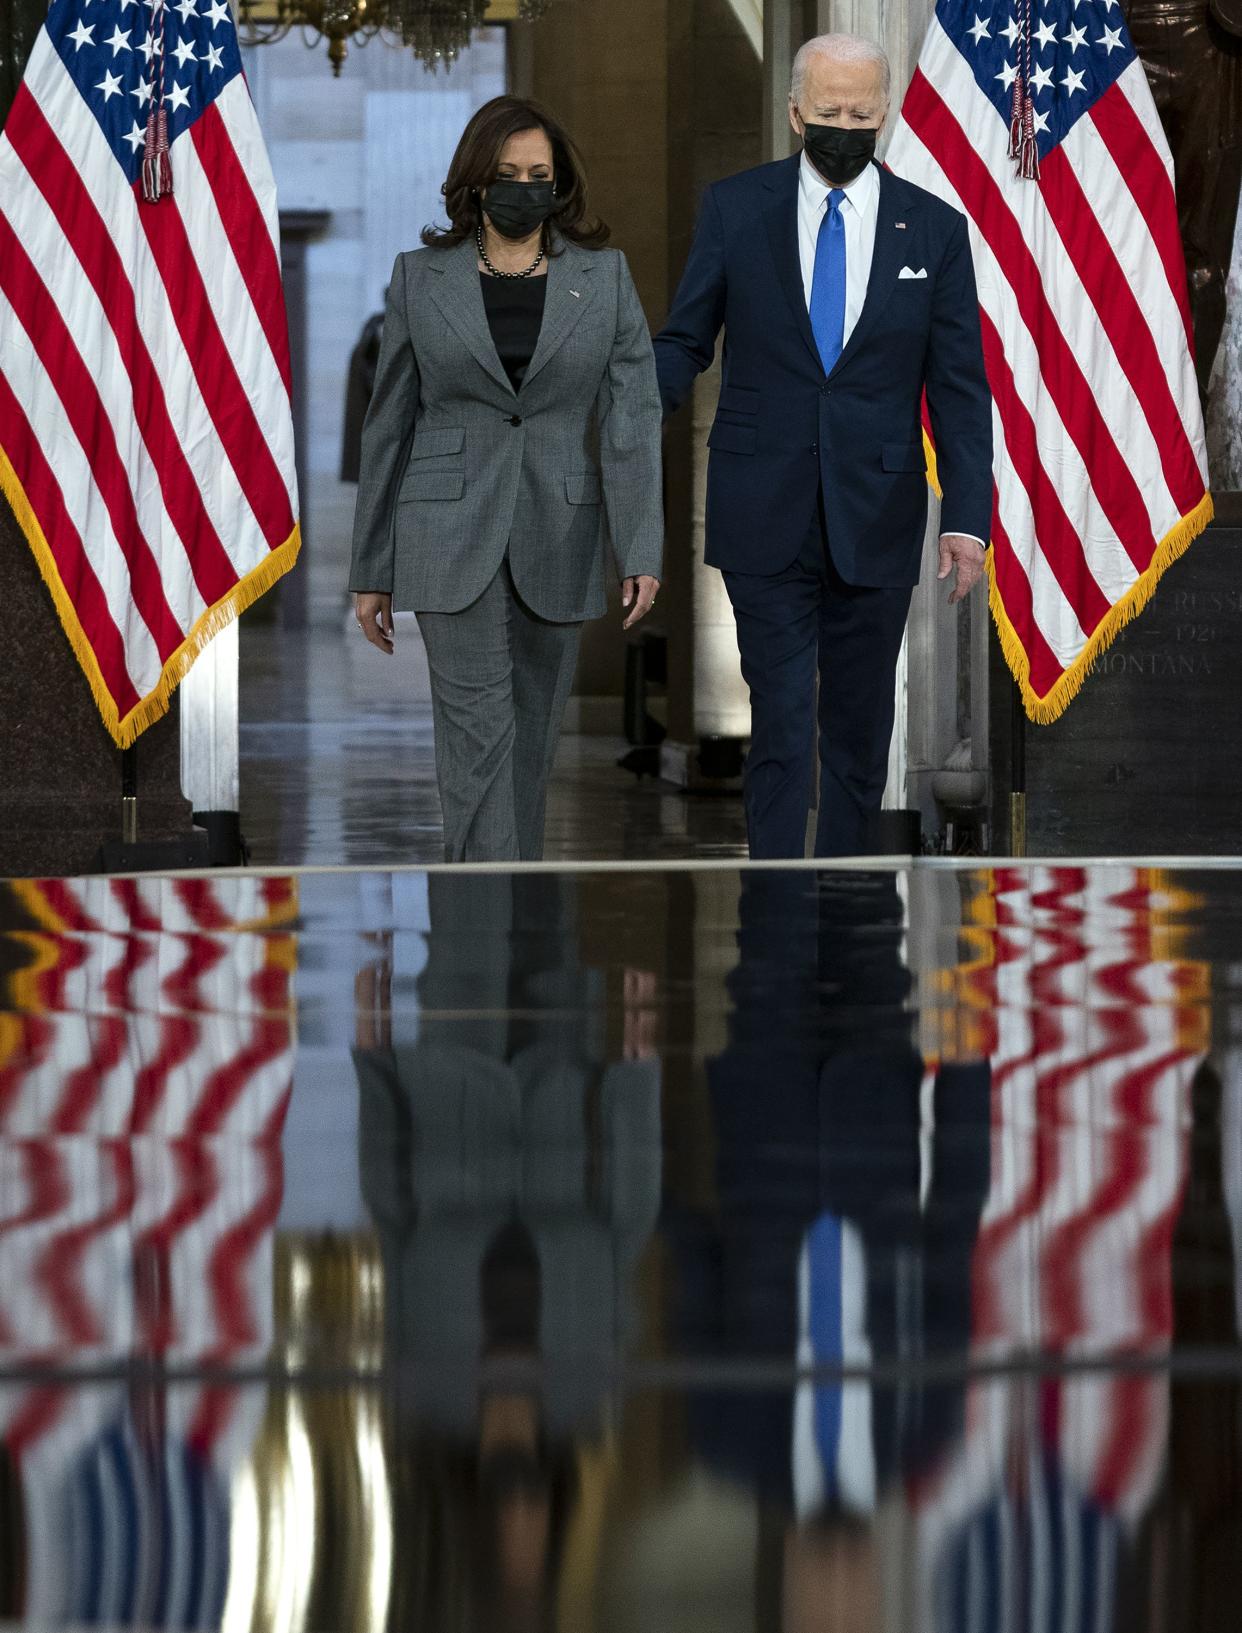 Vice President Kamala Harris and President Joe Biden arrive to give remarks in Statuary Hall of the U.S Capitol on Jan. 6, 2022, in Washington, DC. One year ago, supporters of President Donald Trump attacked the U.S. Capitol Building in an attempt to disrupt a congressional vote to confirm the electoral college win for Joe Biden.